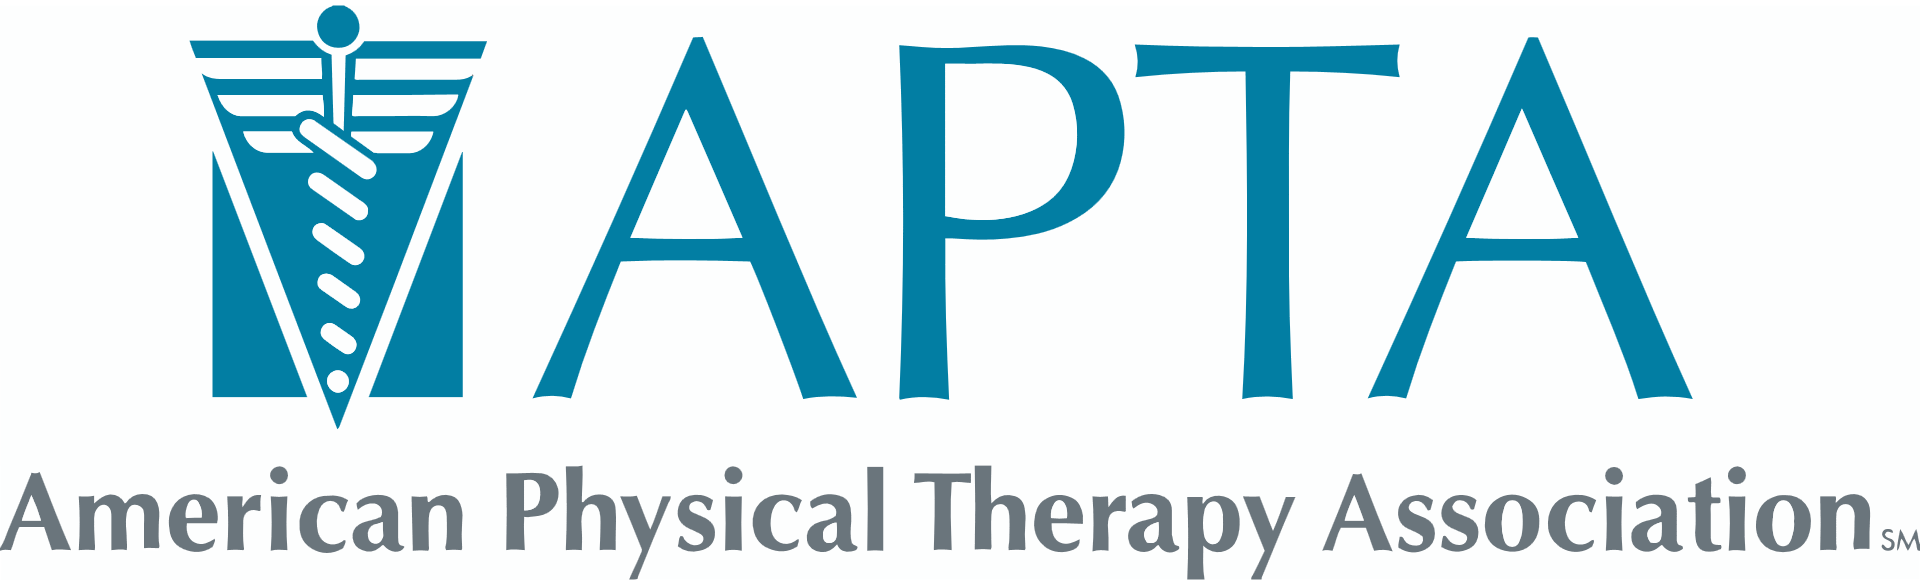 American Physical Therapy Association Logo - Commission on Accreditation in Physical Therapy Education (CAPTE)